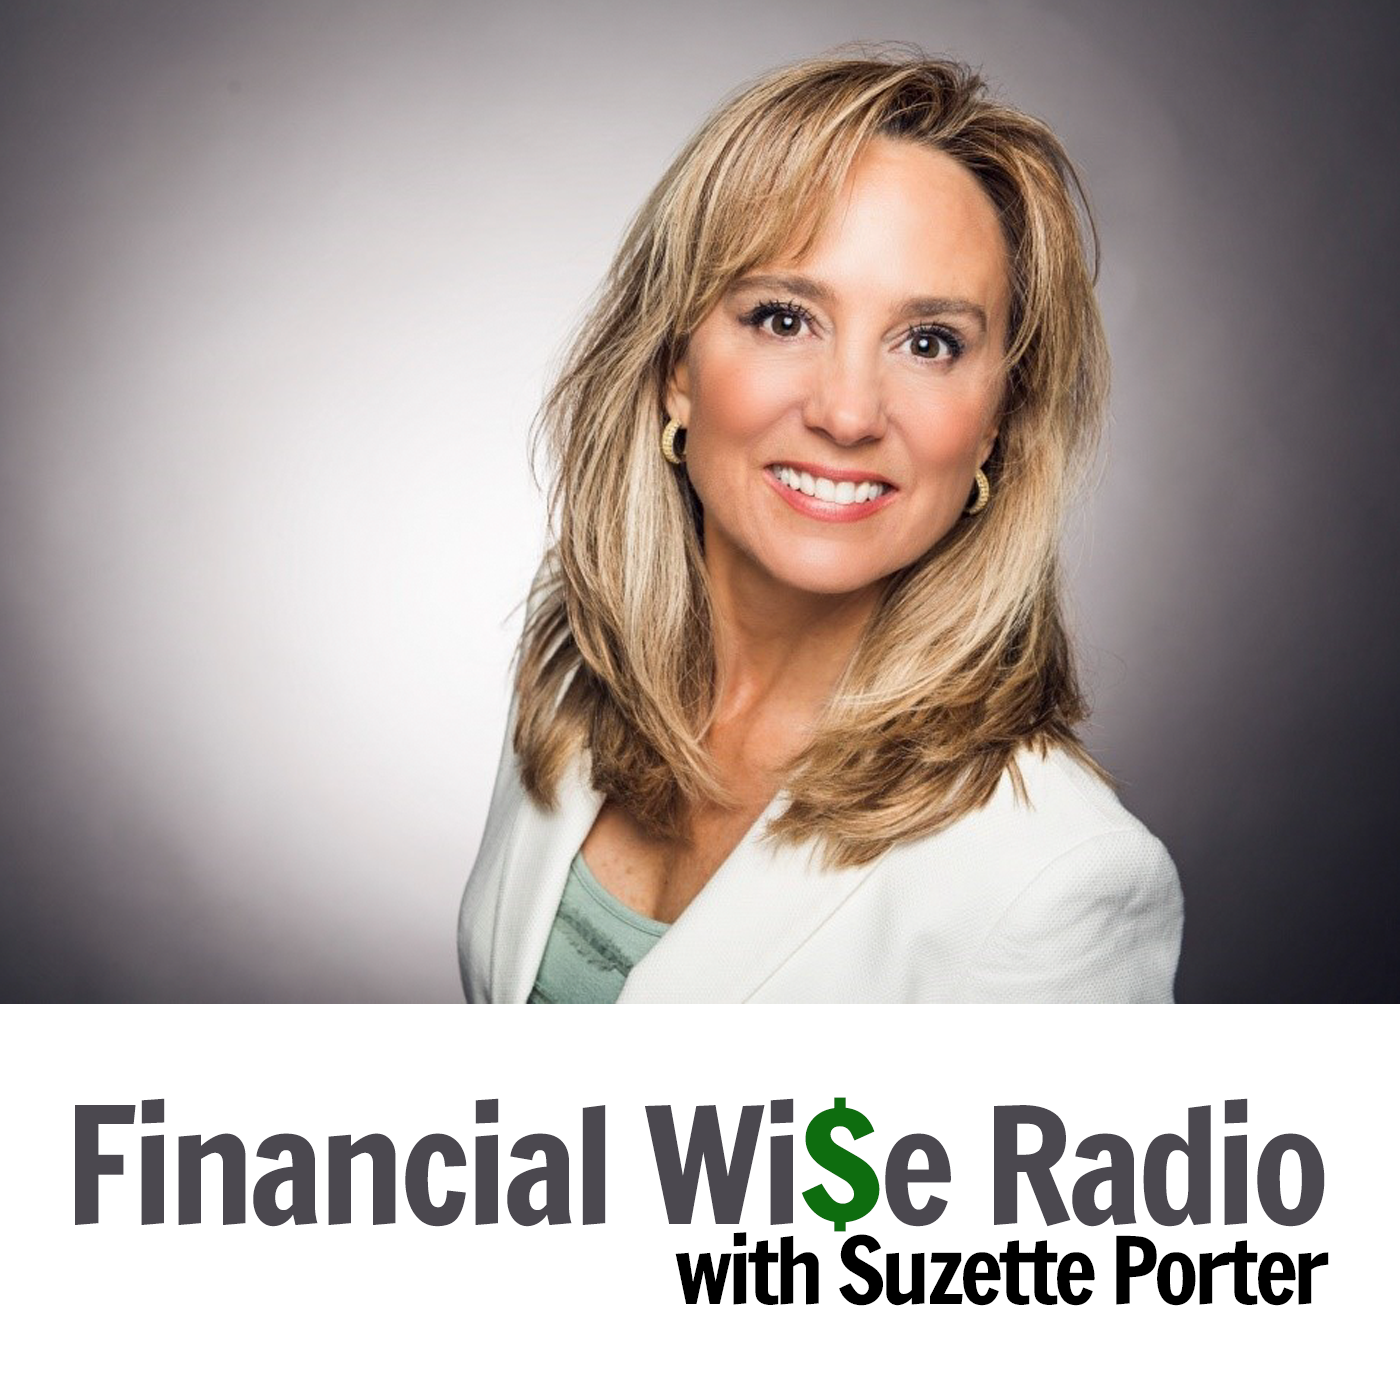 8/19: Building Your Own Financial House, Part 2